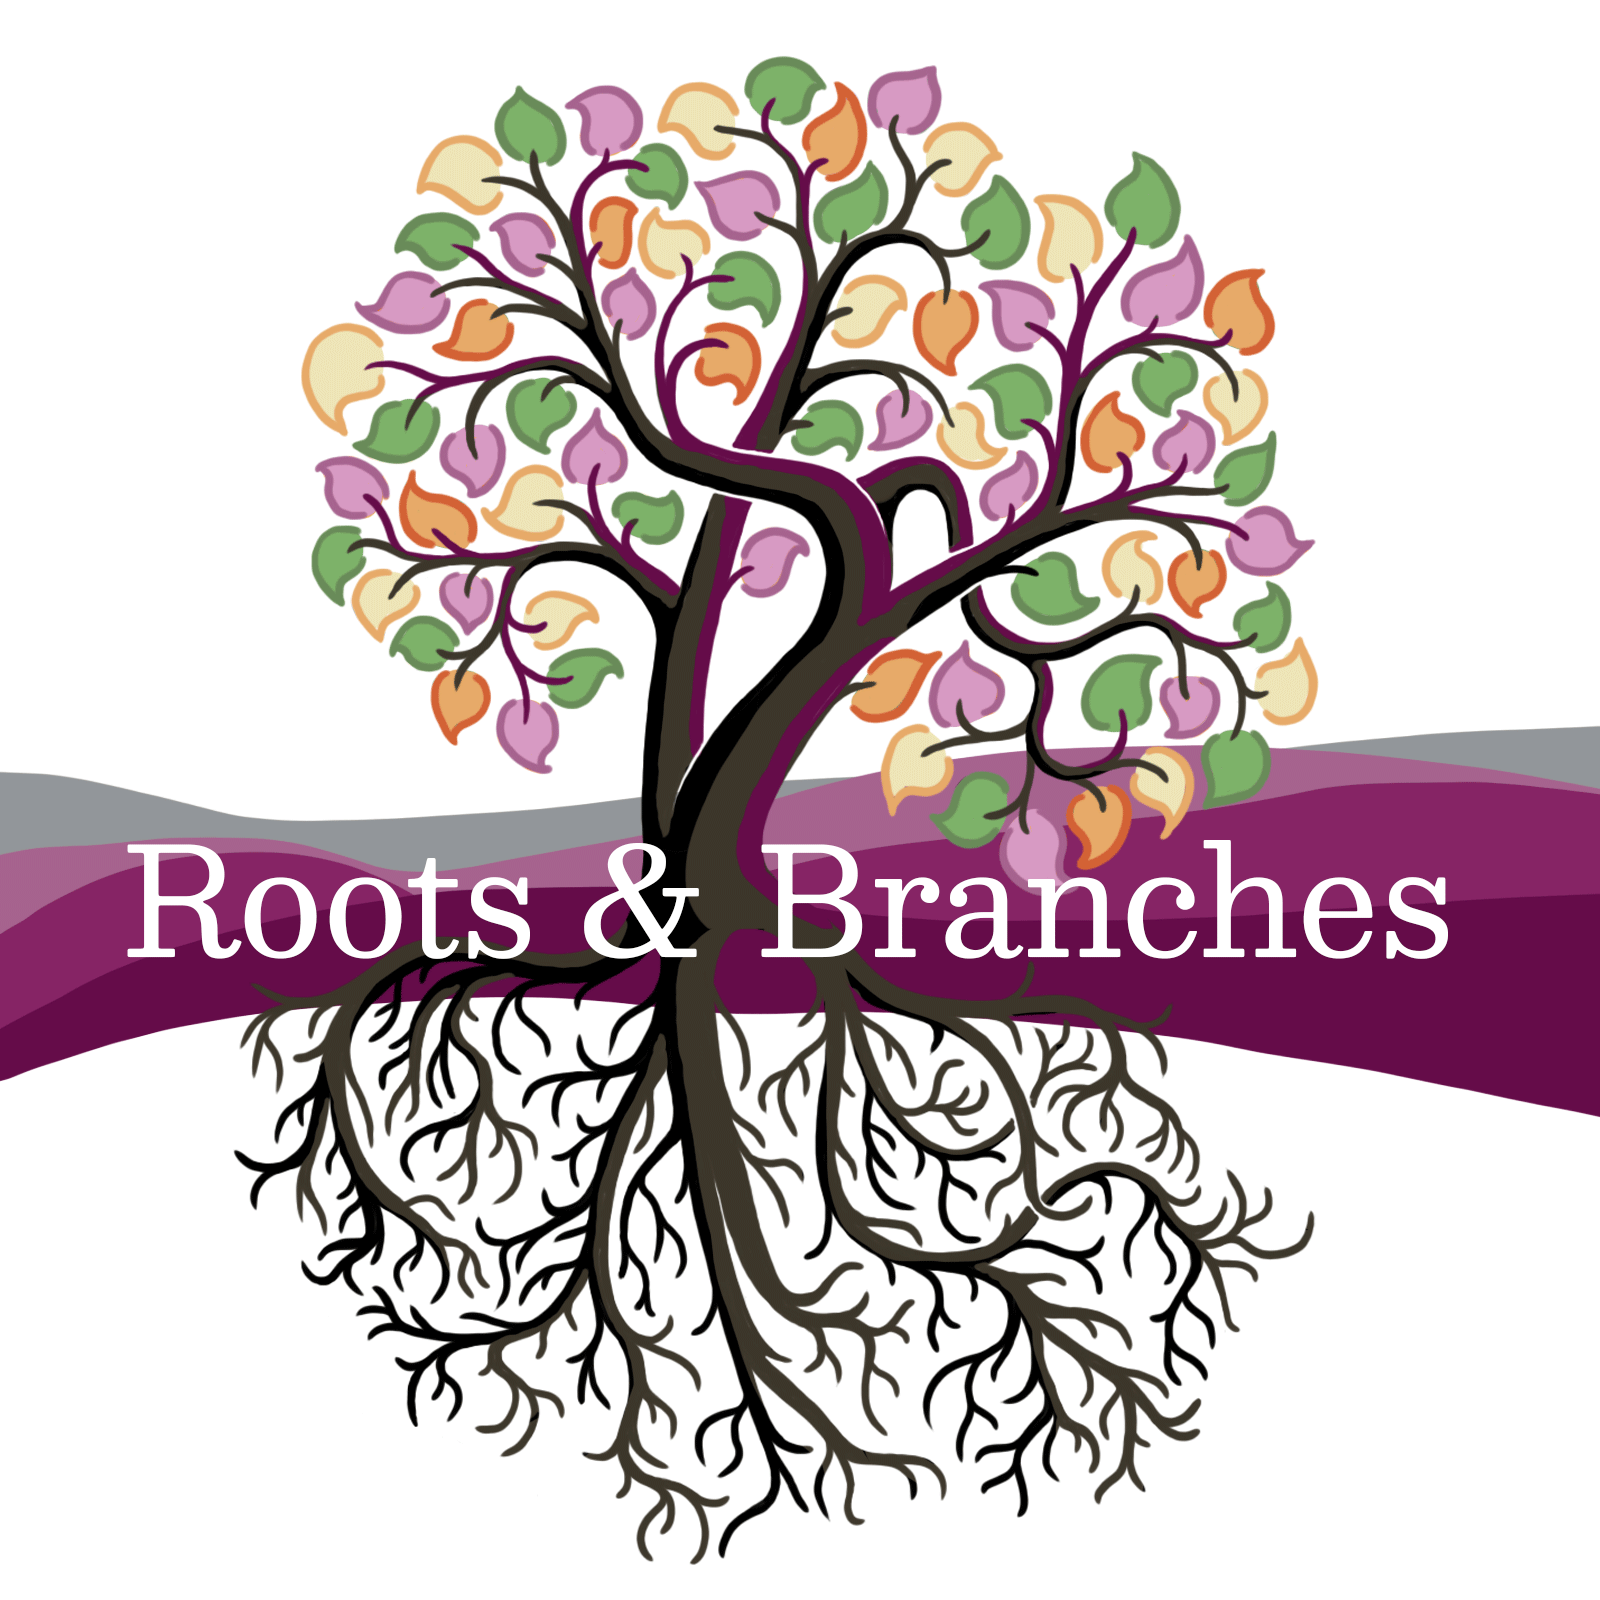 Roots and Branches